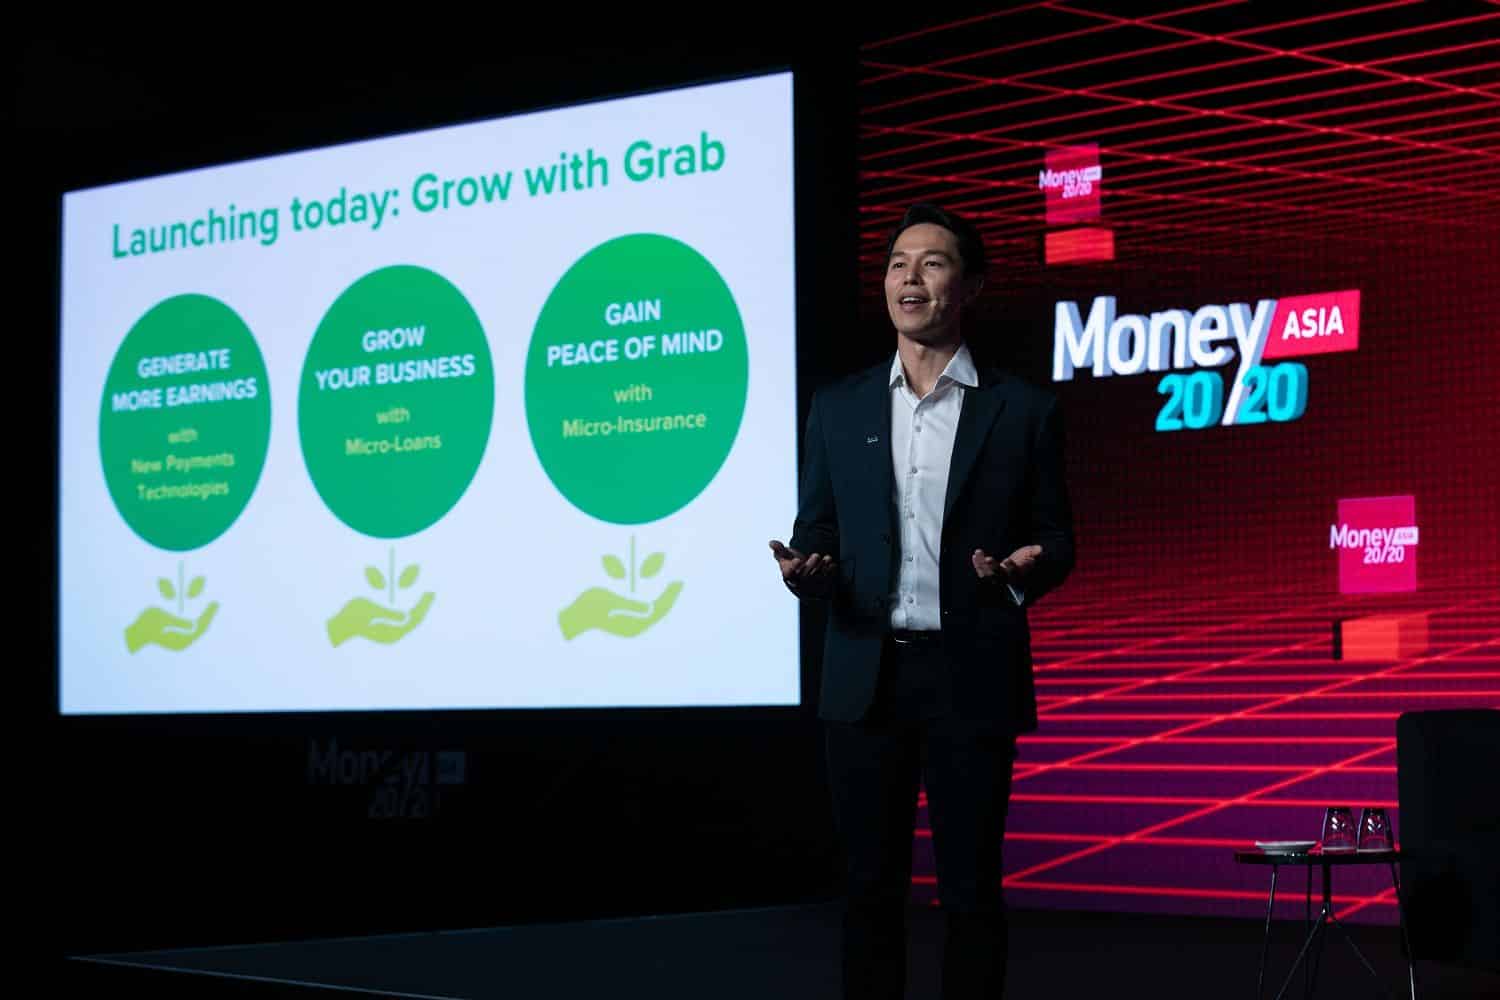 Grow with Grab launch in Singapore. Image: Grab.com